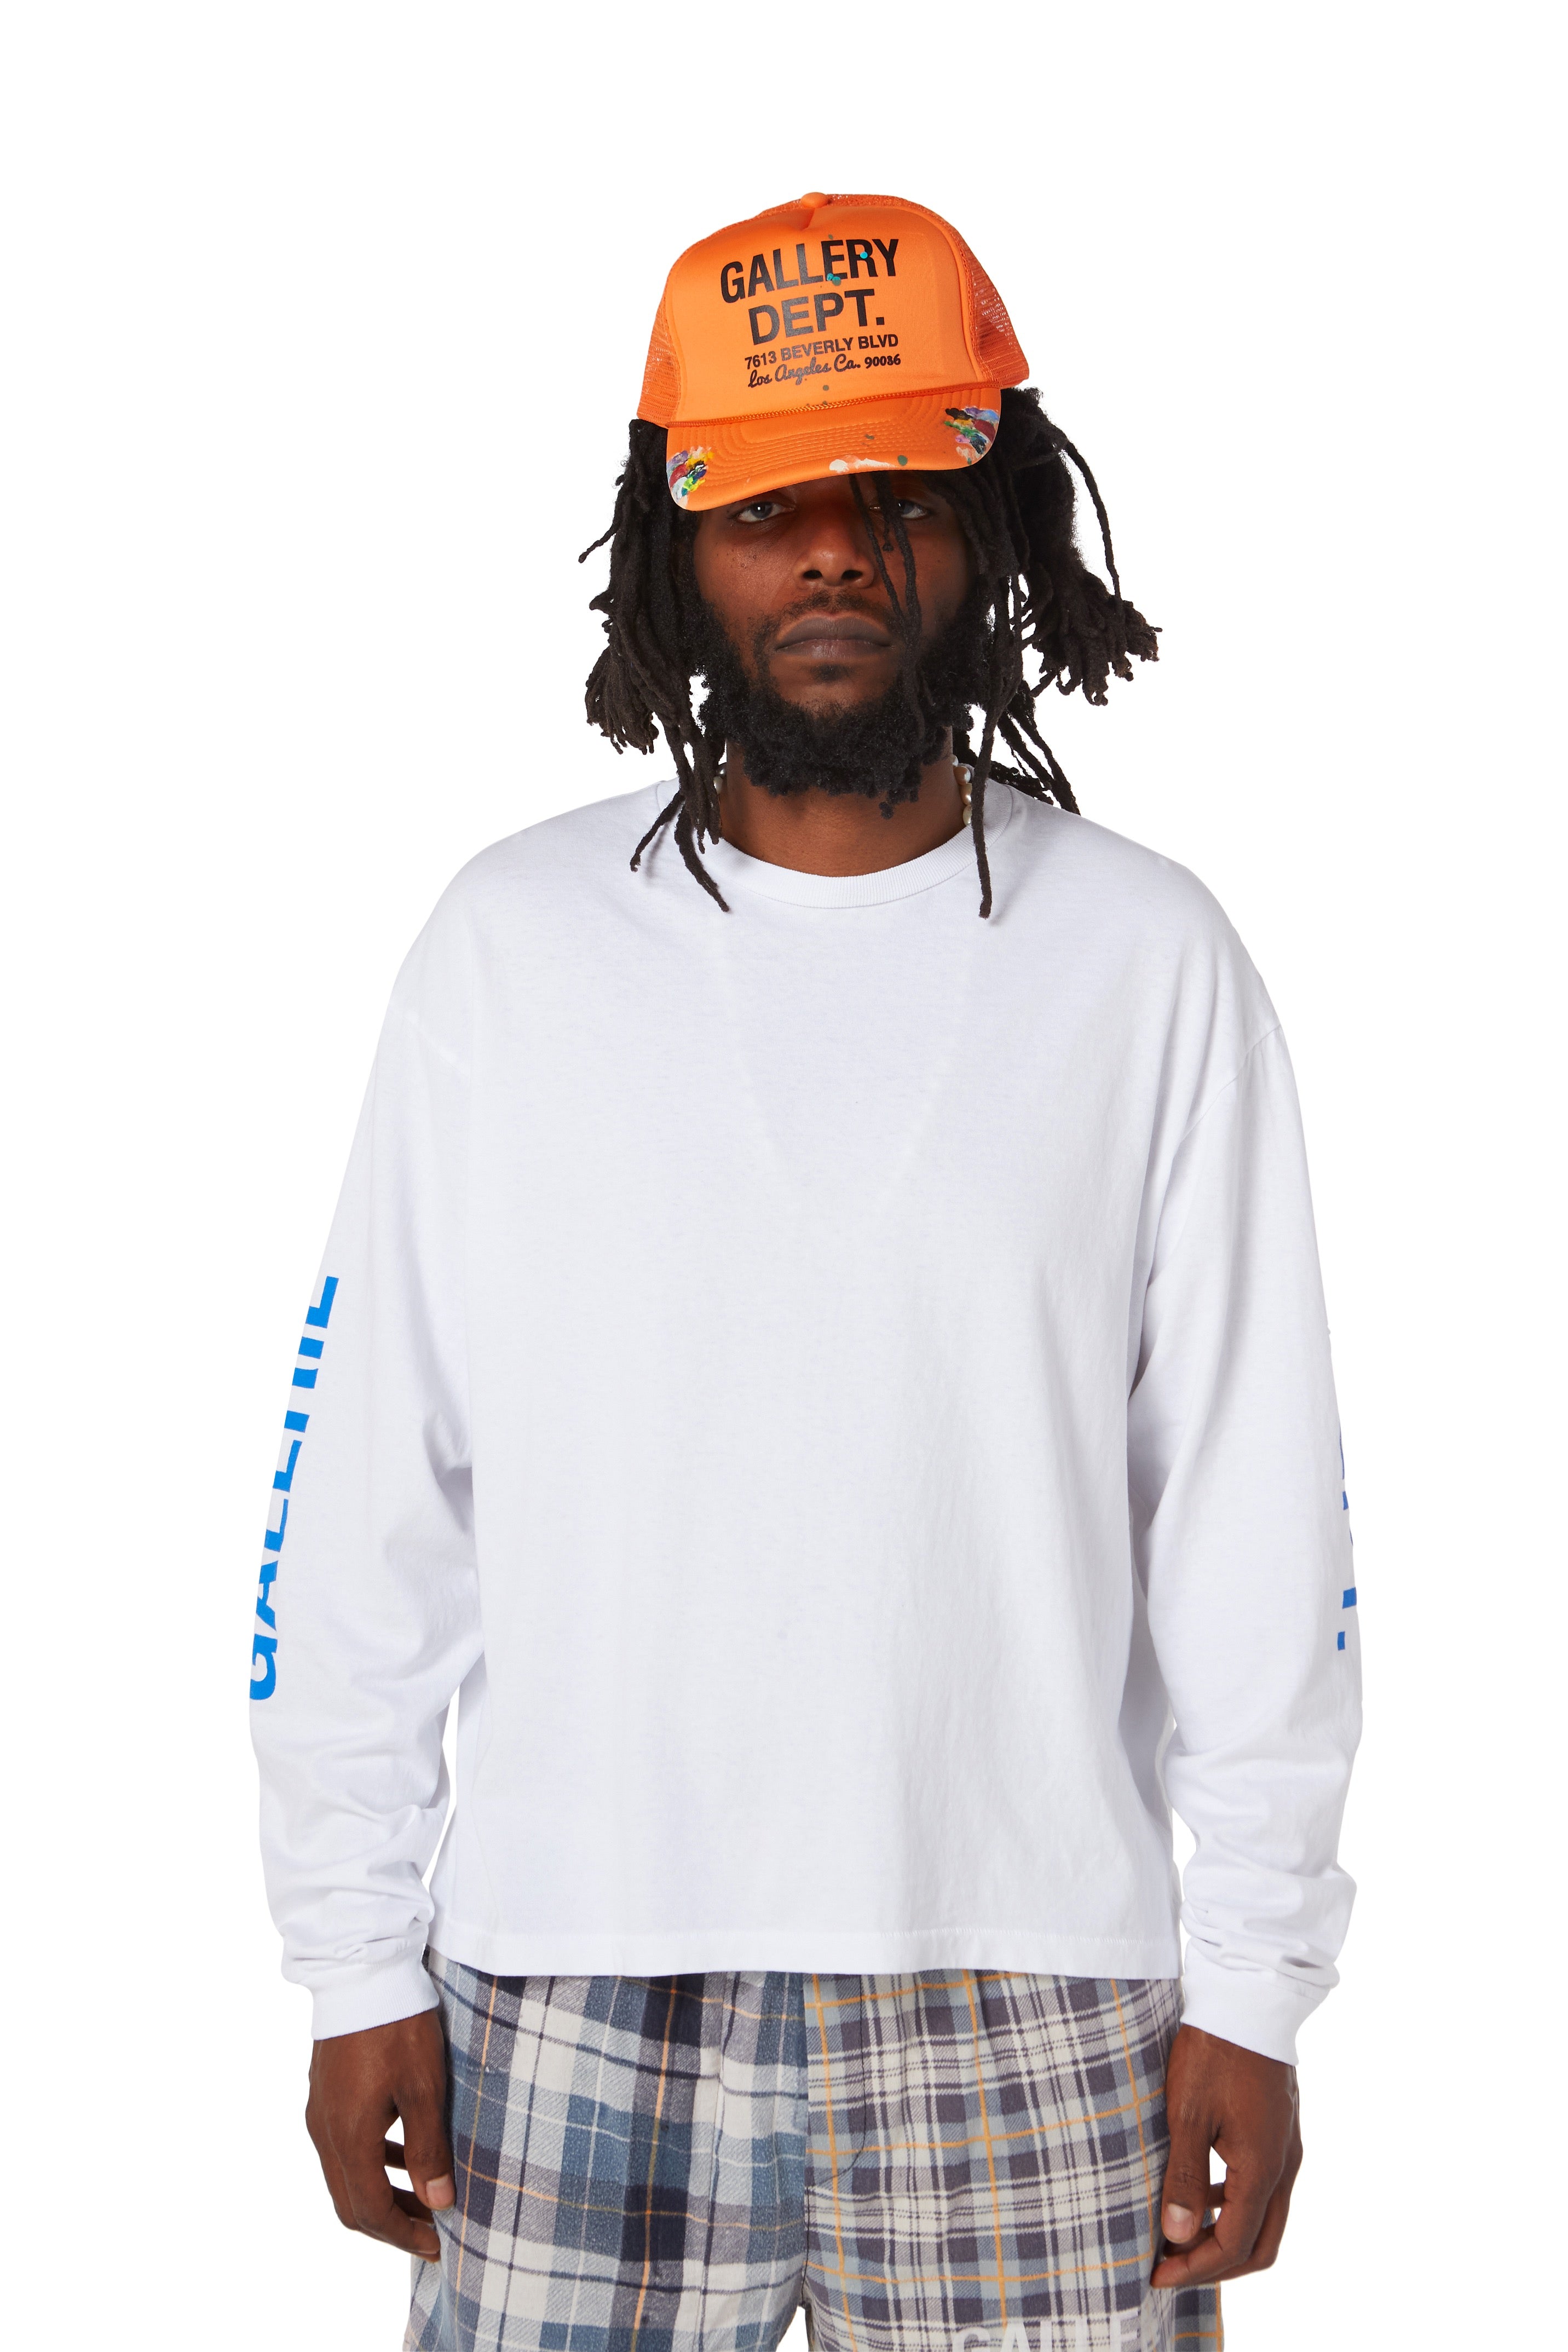 WHITE FRENCH T-SHIRT online – LONG SLEEVE COLLECTOR Dept Gallery -